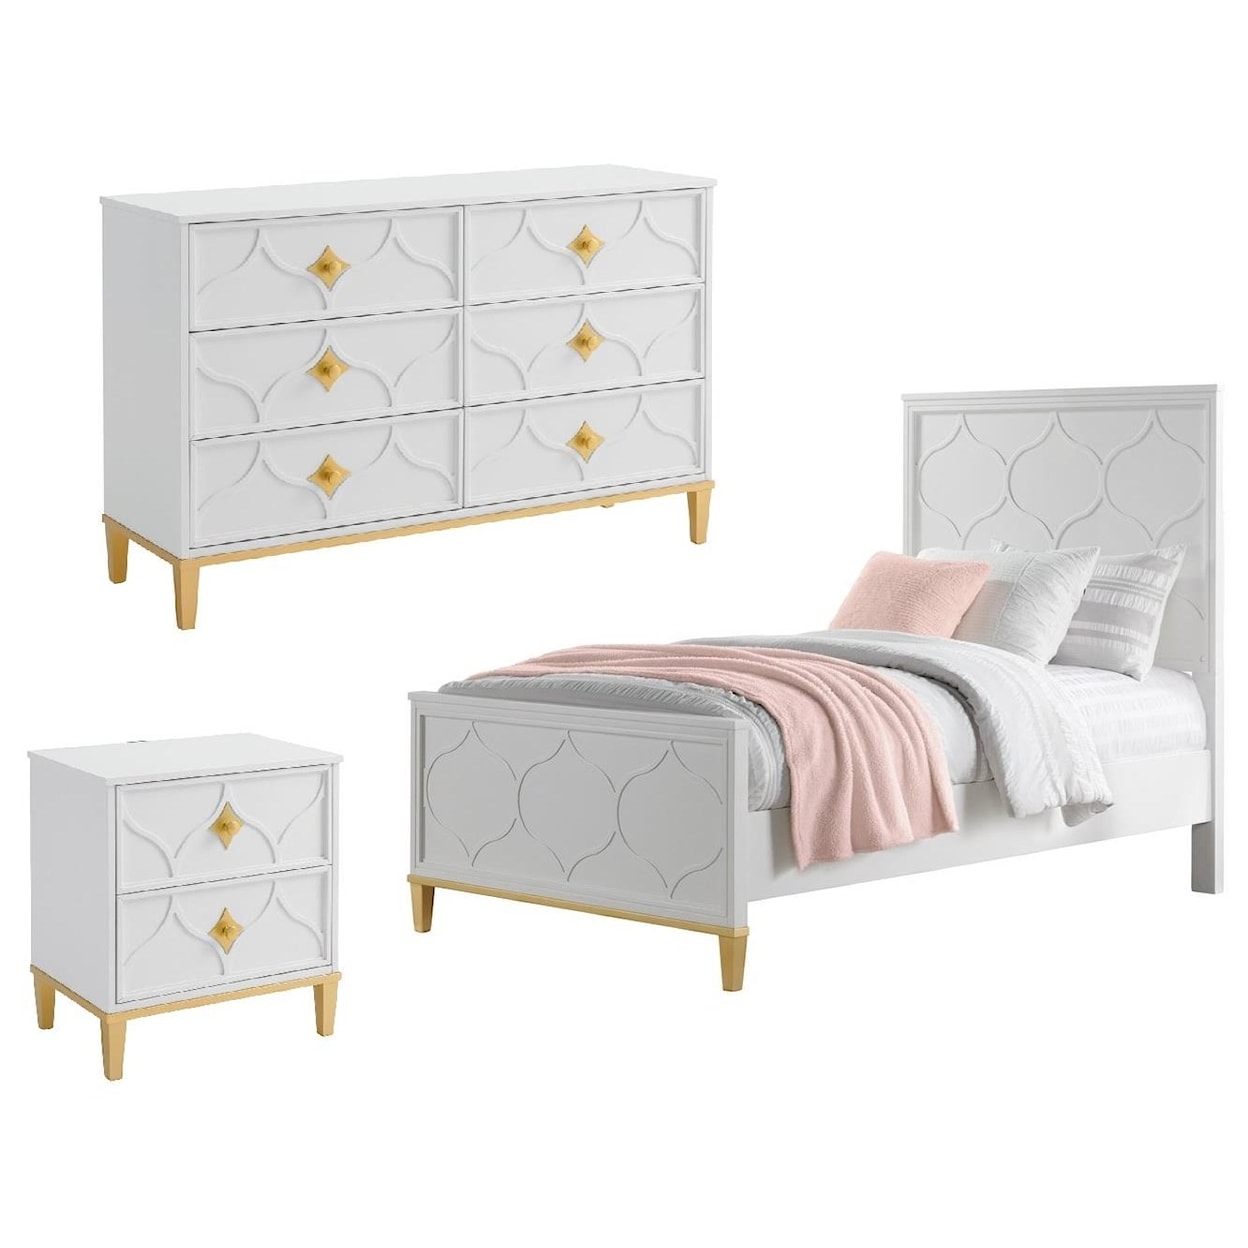 Martin Svensson Home Emma Twin Bed, Dresser and Nightstand